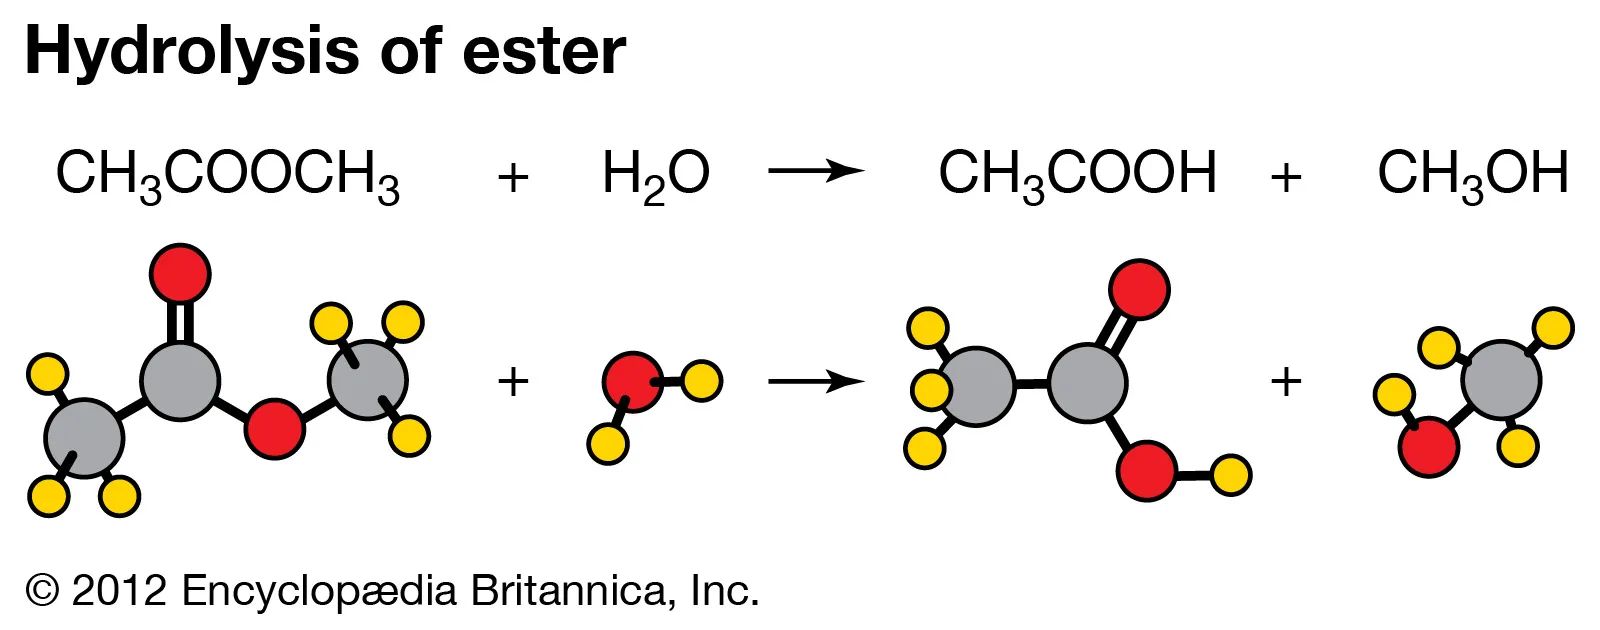 <p>-chemical reaction in which bonds between molecules in a polymer are broken down by the addition of H2O to form monomers (H and OH) -energy is released when the bonds are broken</p>